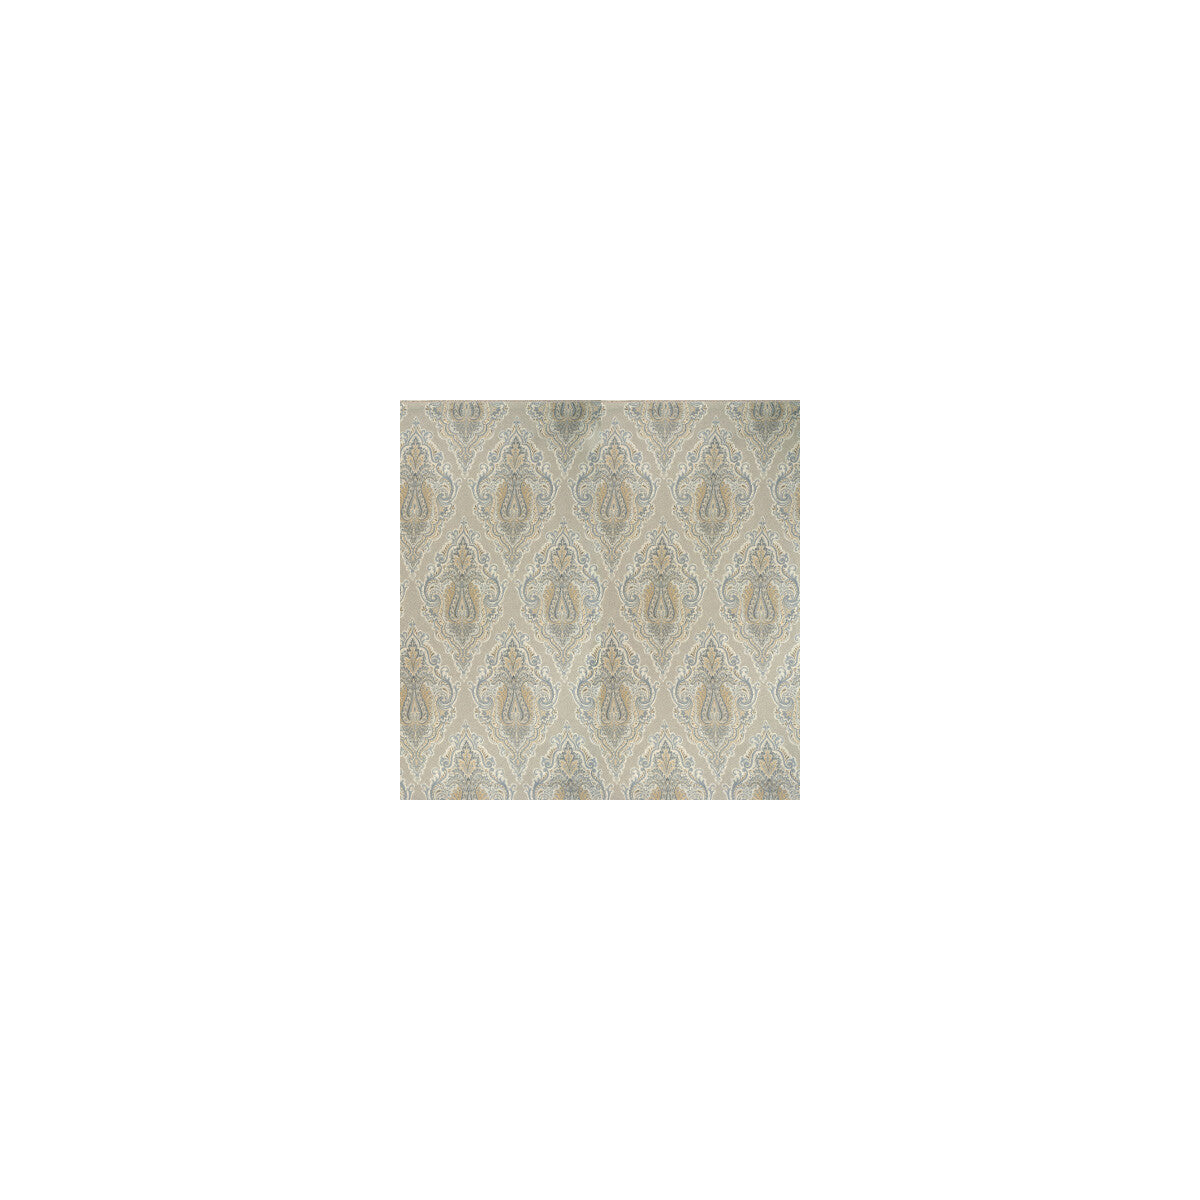 Kravet Design fabric in 34679-54 color - pattern 34679.54.0 - by Kravet Design in the Crypton Home collection